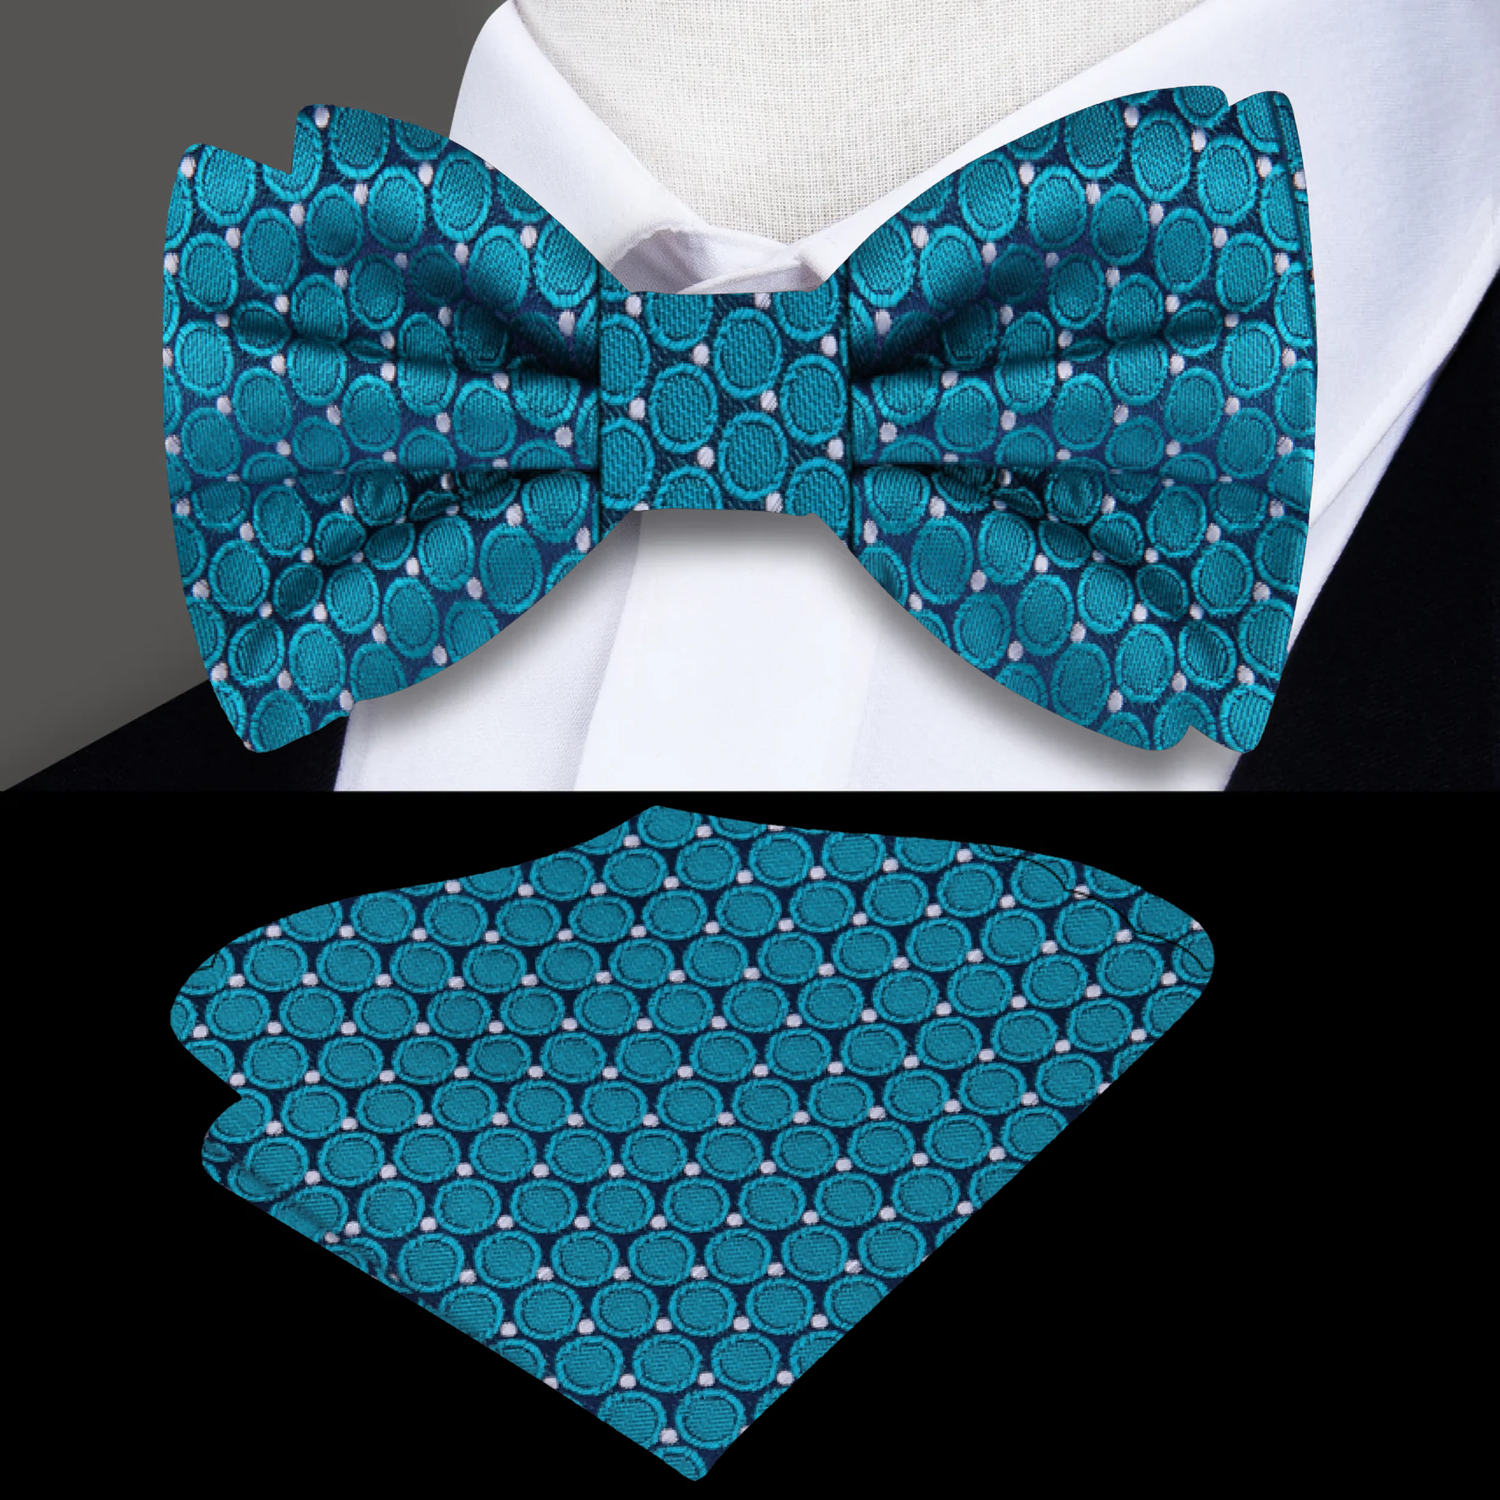 Teal Blue Circles Bow Tie and Pocket SquareTeal, Blue, Grey Circles Bow Tie and Pocket Square||Teal Green